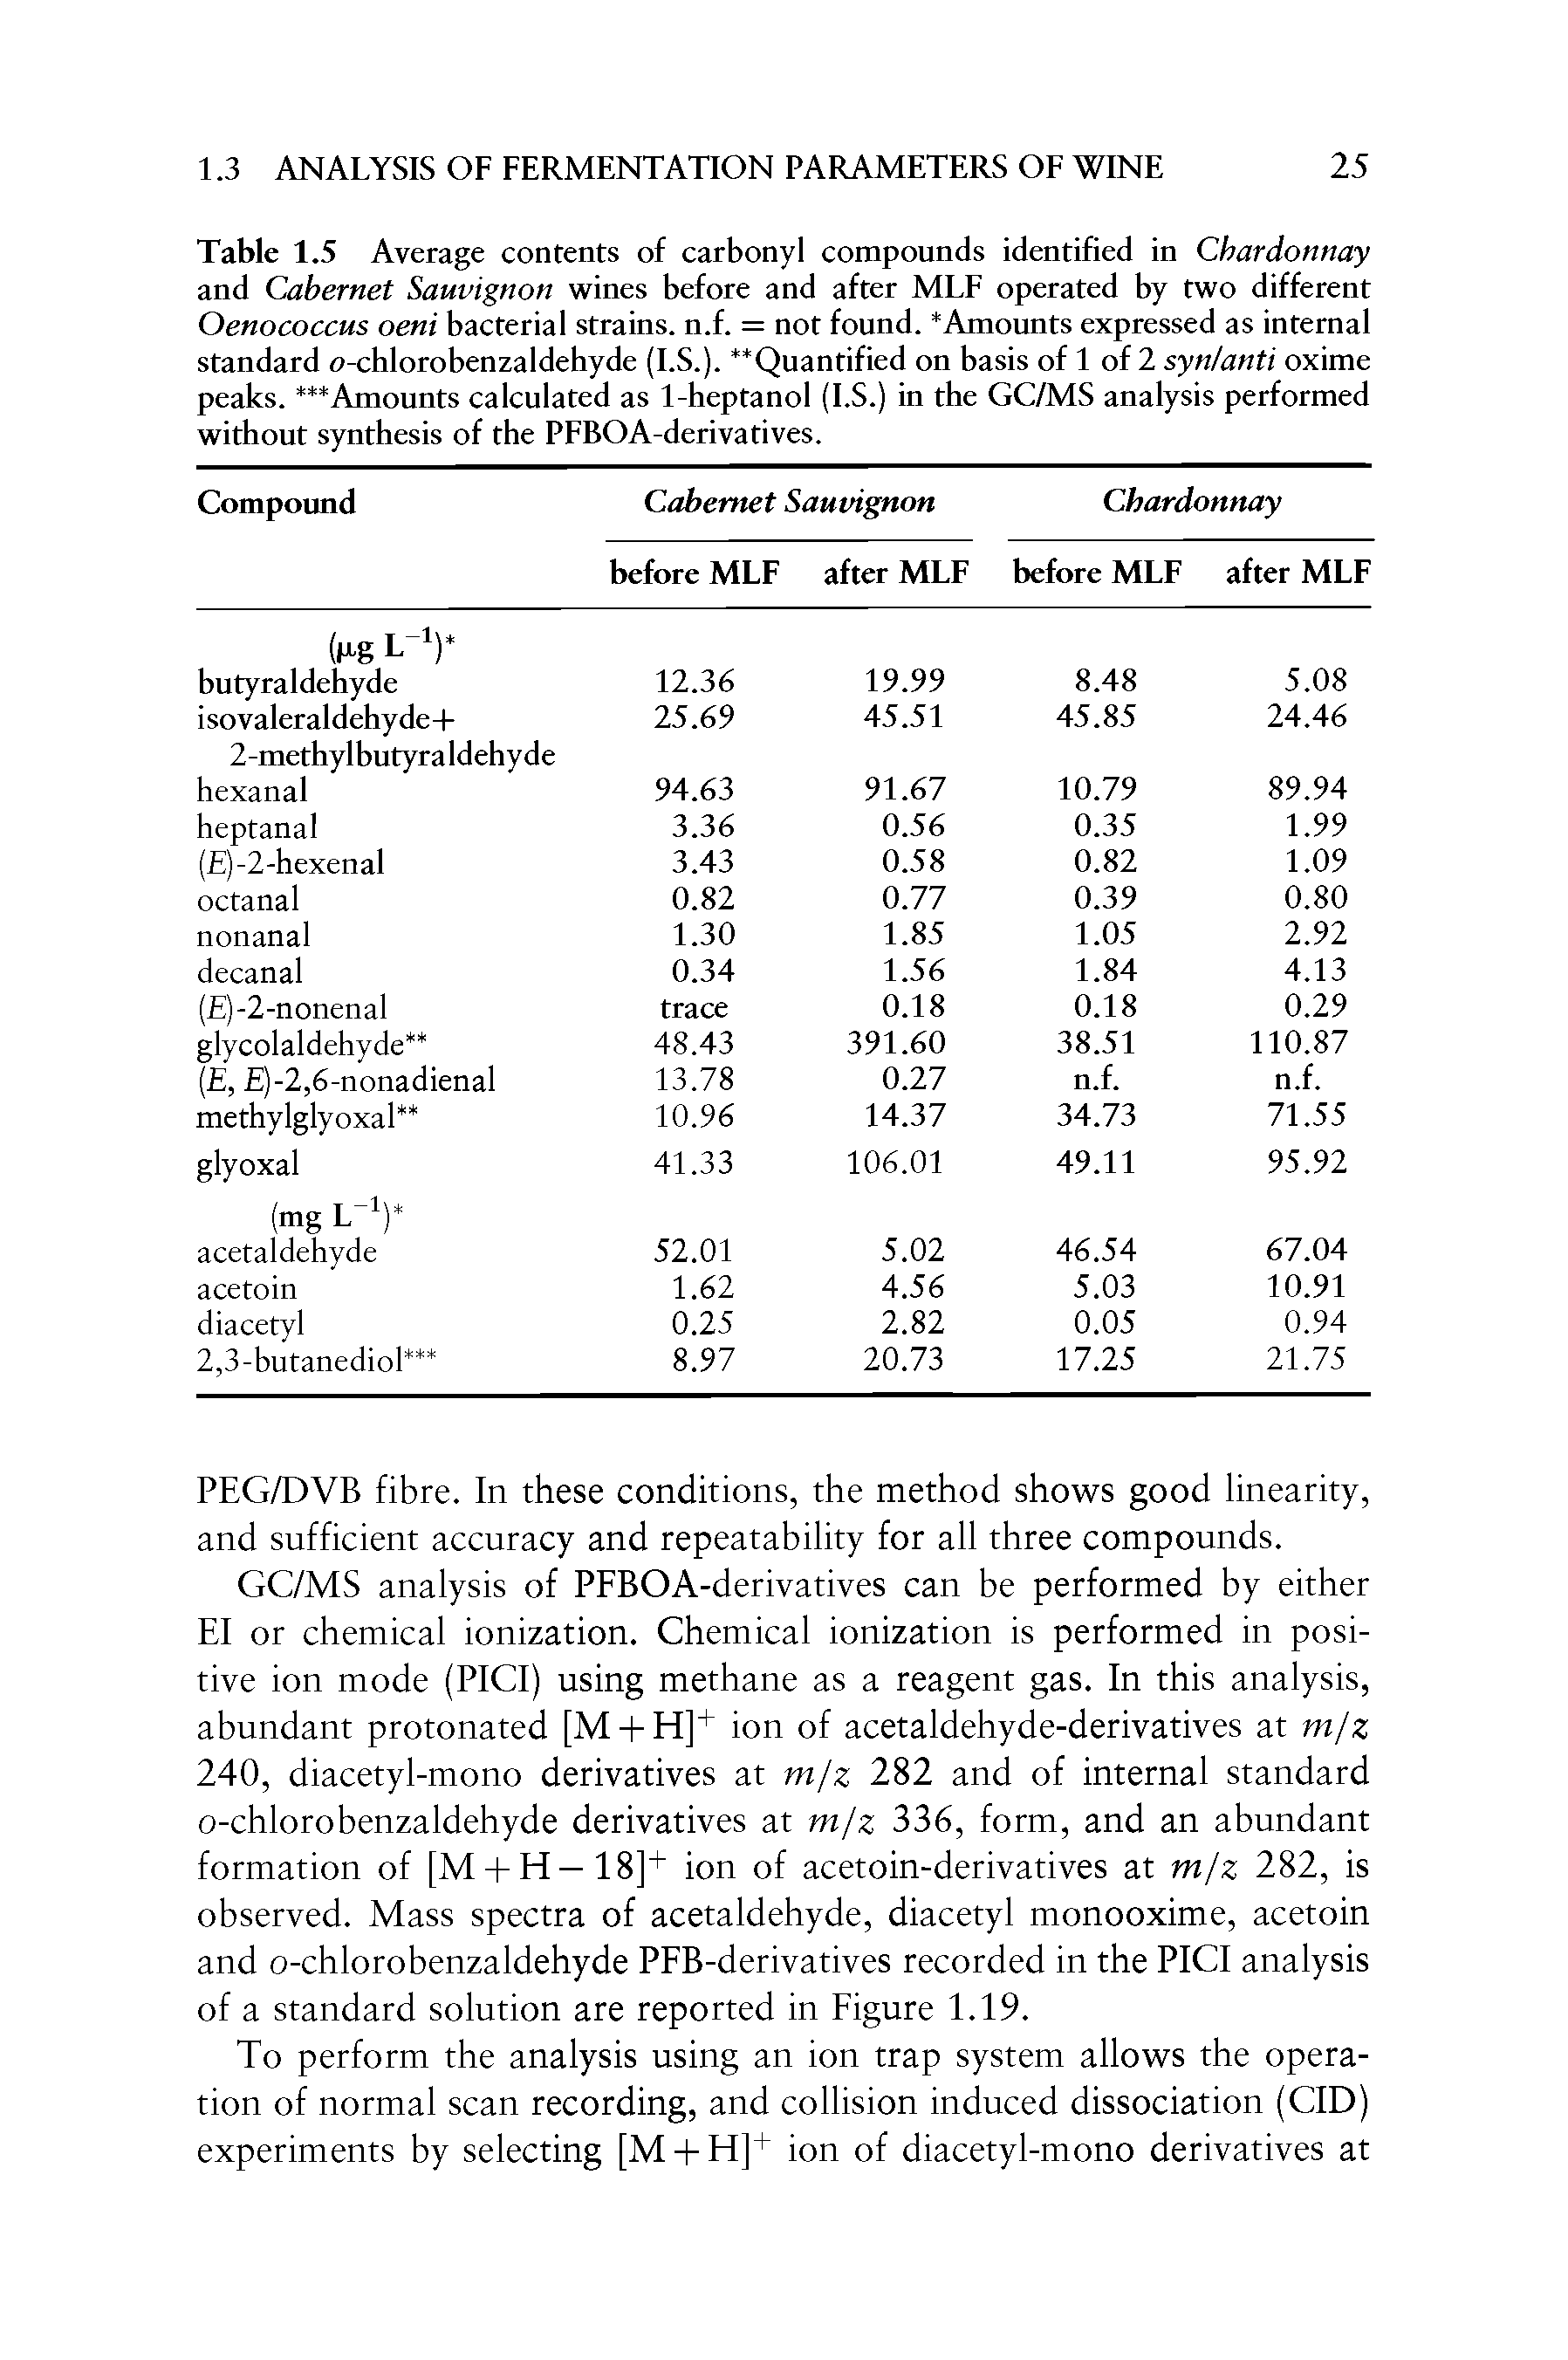 Table 1.5 Average contents of carbonyl compounds identified in Cbardonnay and Cabernet Sauvignon wines before and after MLF operated by two different Oenococcus oeni bacterial strains, n.f. = not found. Amounts expressed as internal standard o-chlorobenzaldehyde (I.S.). Quantified on basis of 1 of 2 synlanti oxime peaks. Amounts calculated as 1-heptanol (I.S.) in the GC/MS analysis performed without synthesis of the PFBOA-derivafives.